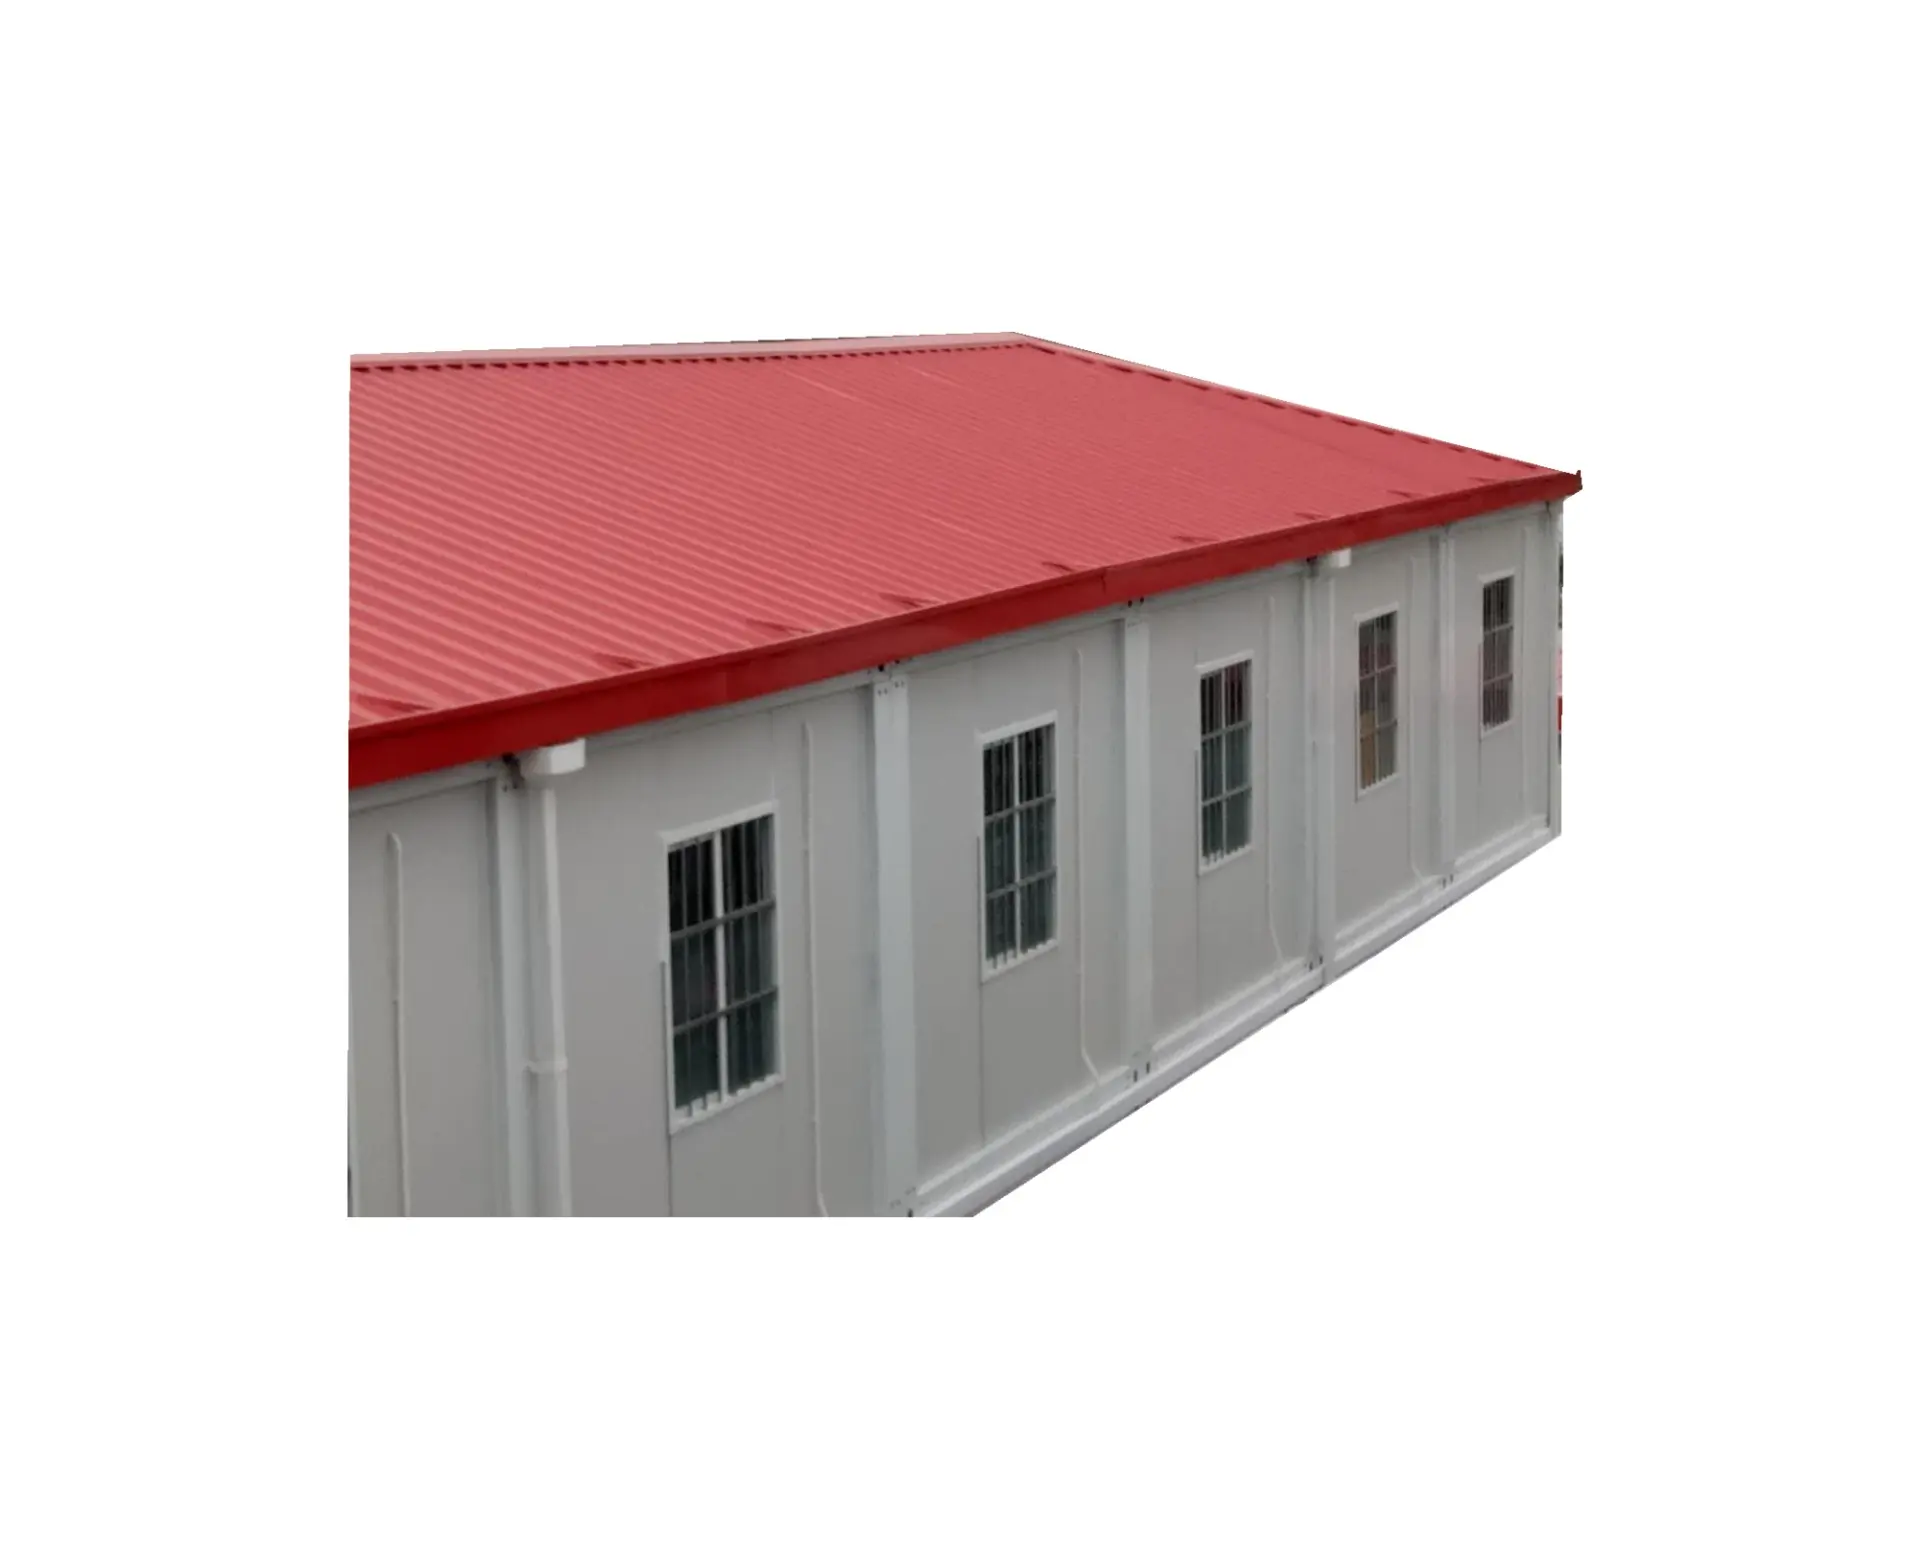 YDY Hot Sale 20FT Buildings Expandable Container House Price In India Office Building Expandable Container